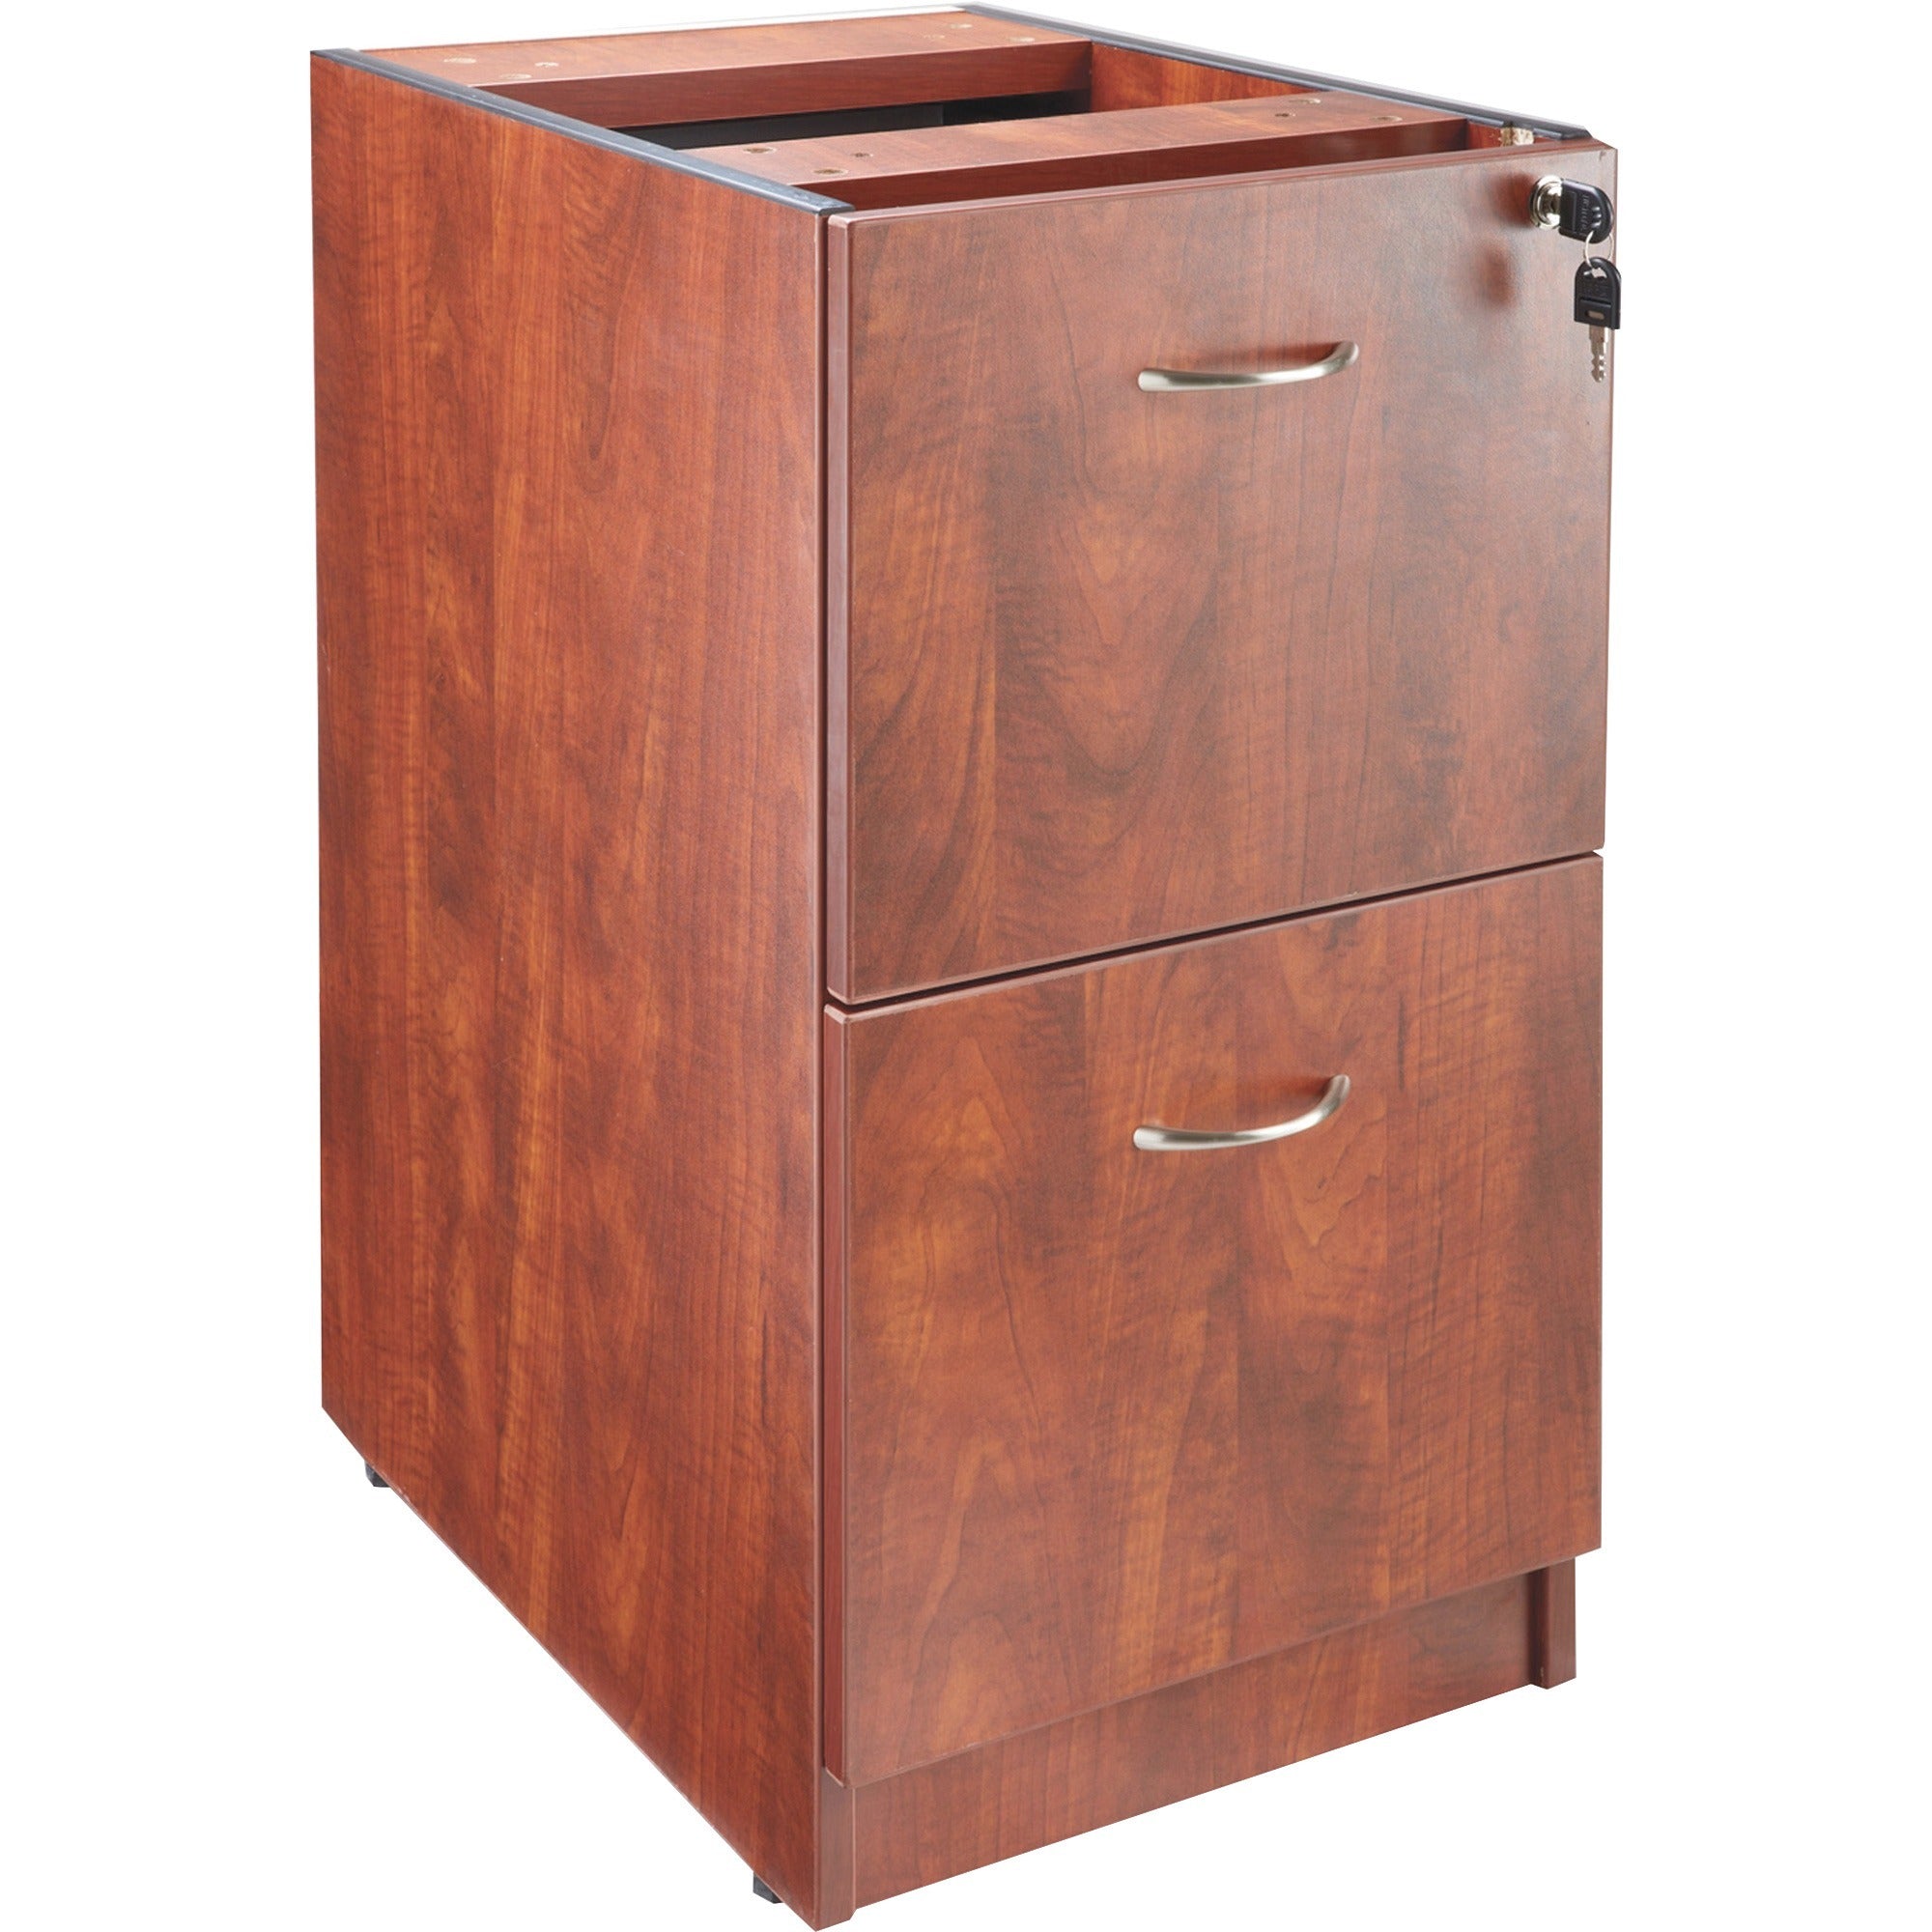 Lorell Essentials Series File/File Fixed File Cabinet - 15.5" x 21.9" x 28.3" - 2 x File Drawer(s) - Finish: Cherry, Laminate - 